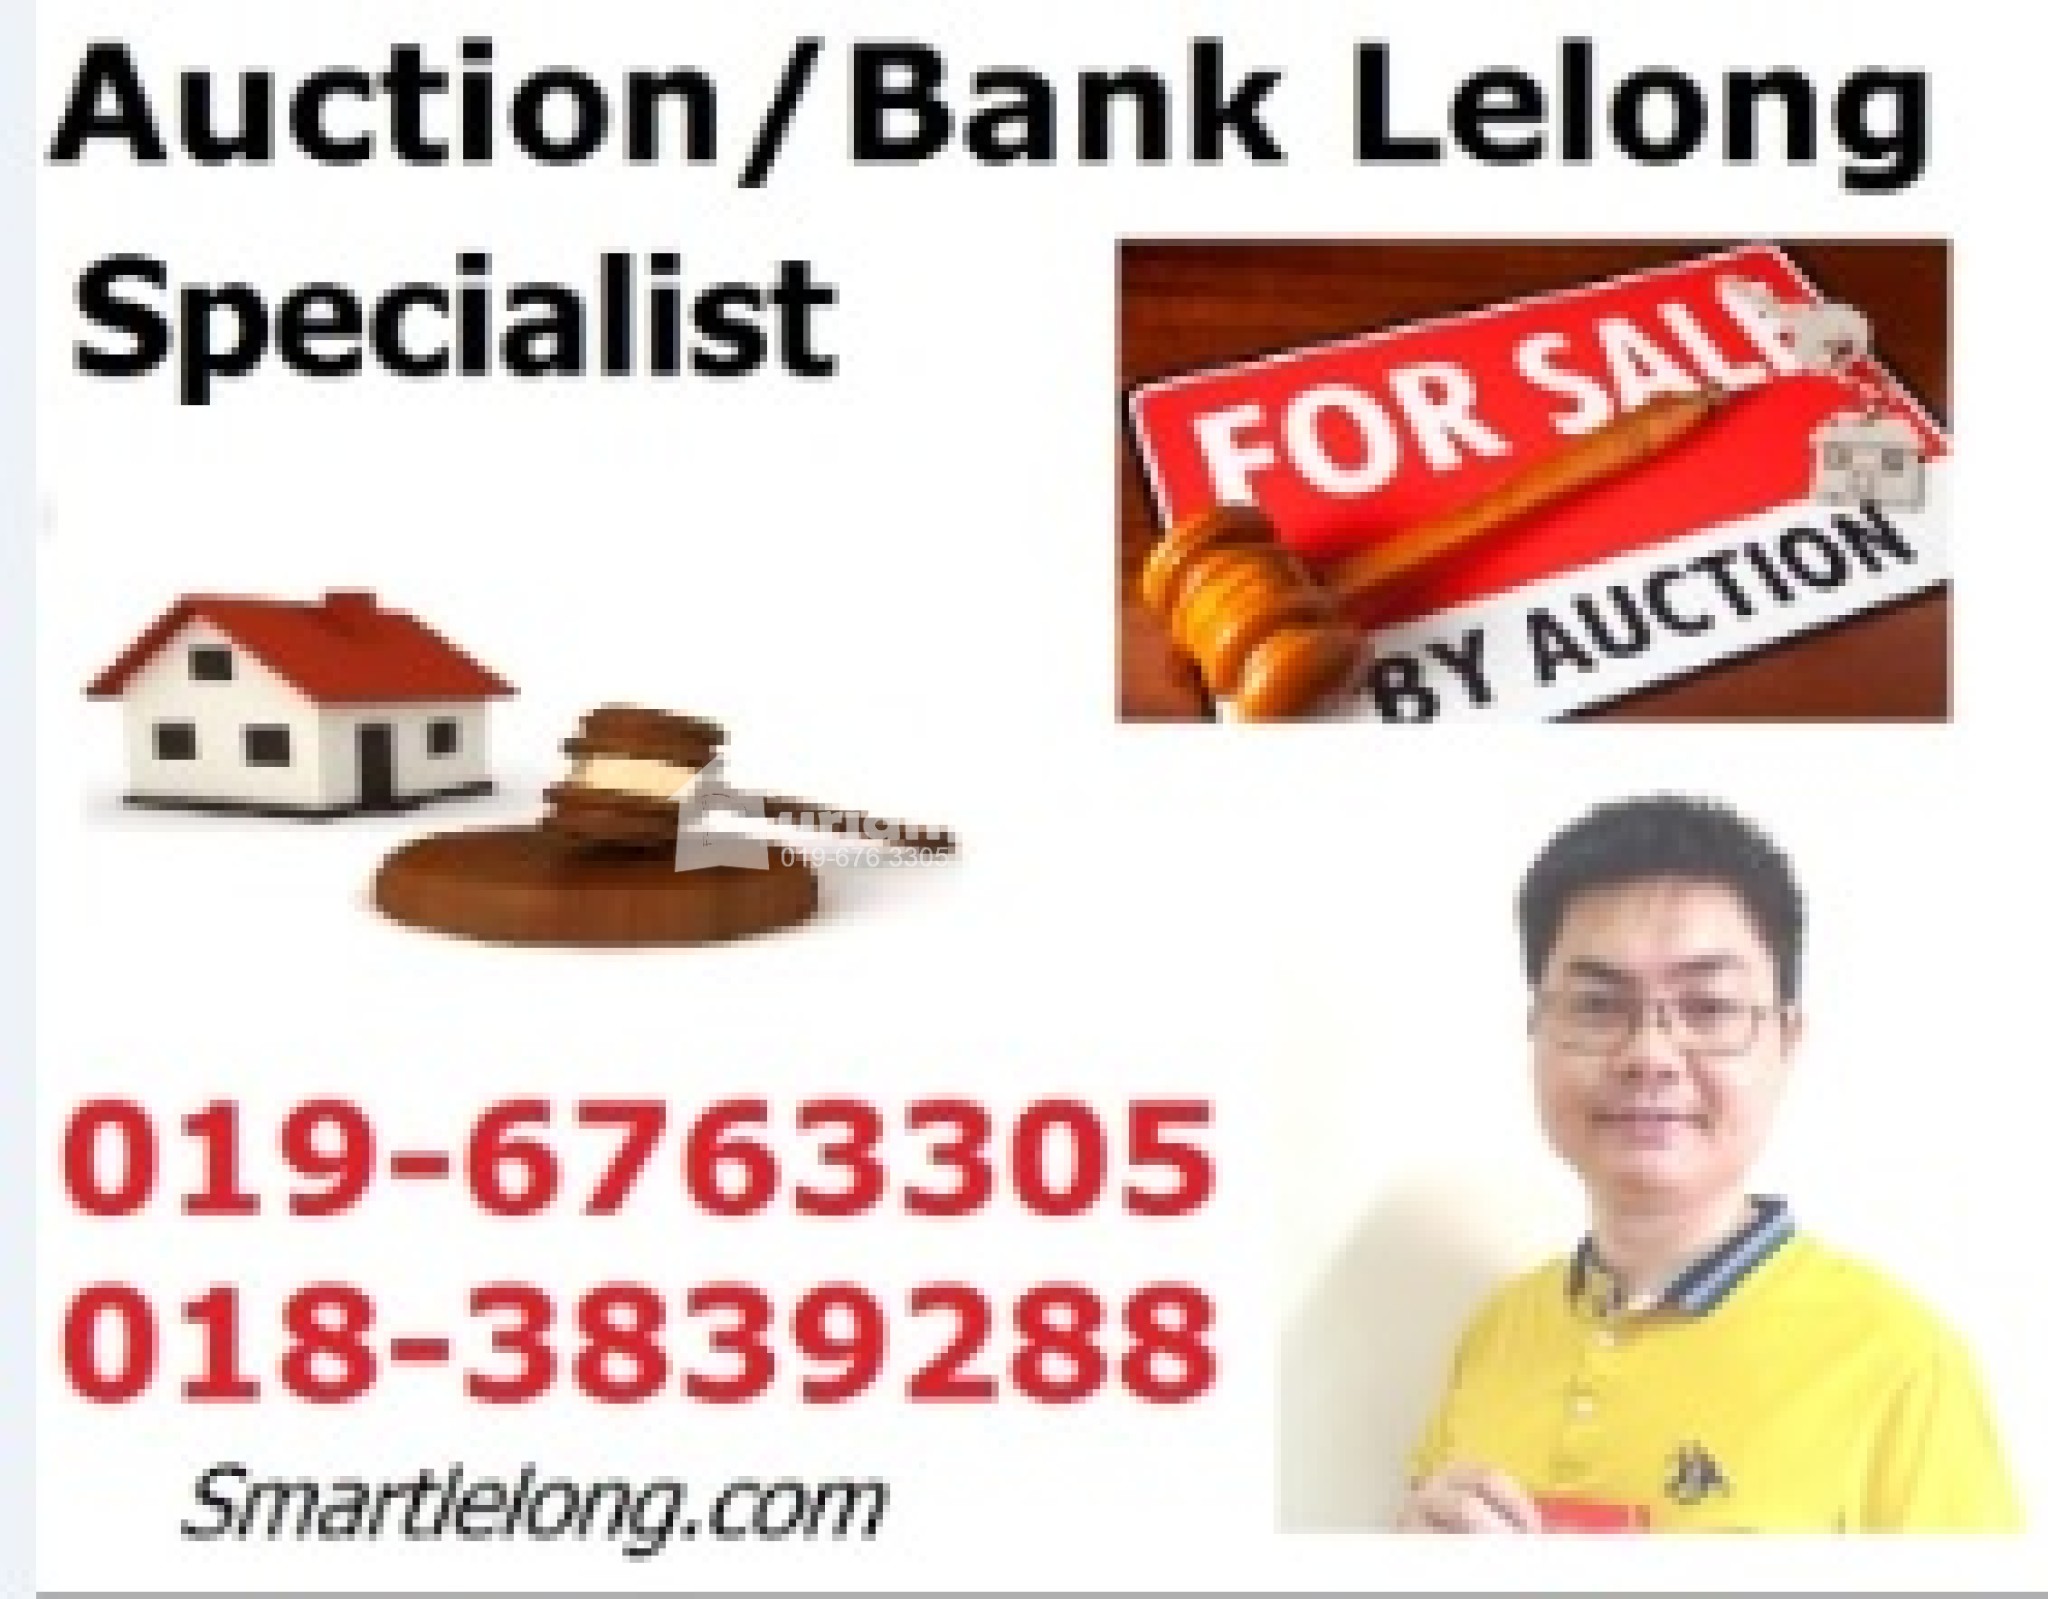 Terrace House For Auction at Bandar Country Homes